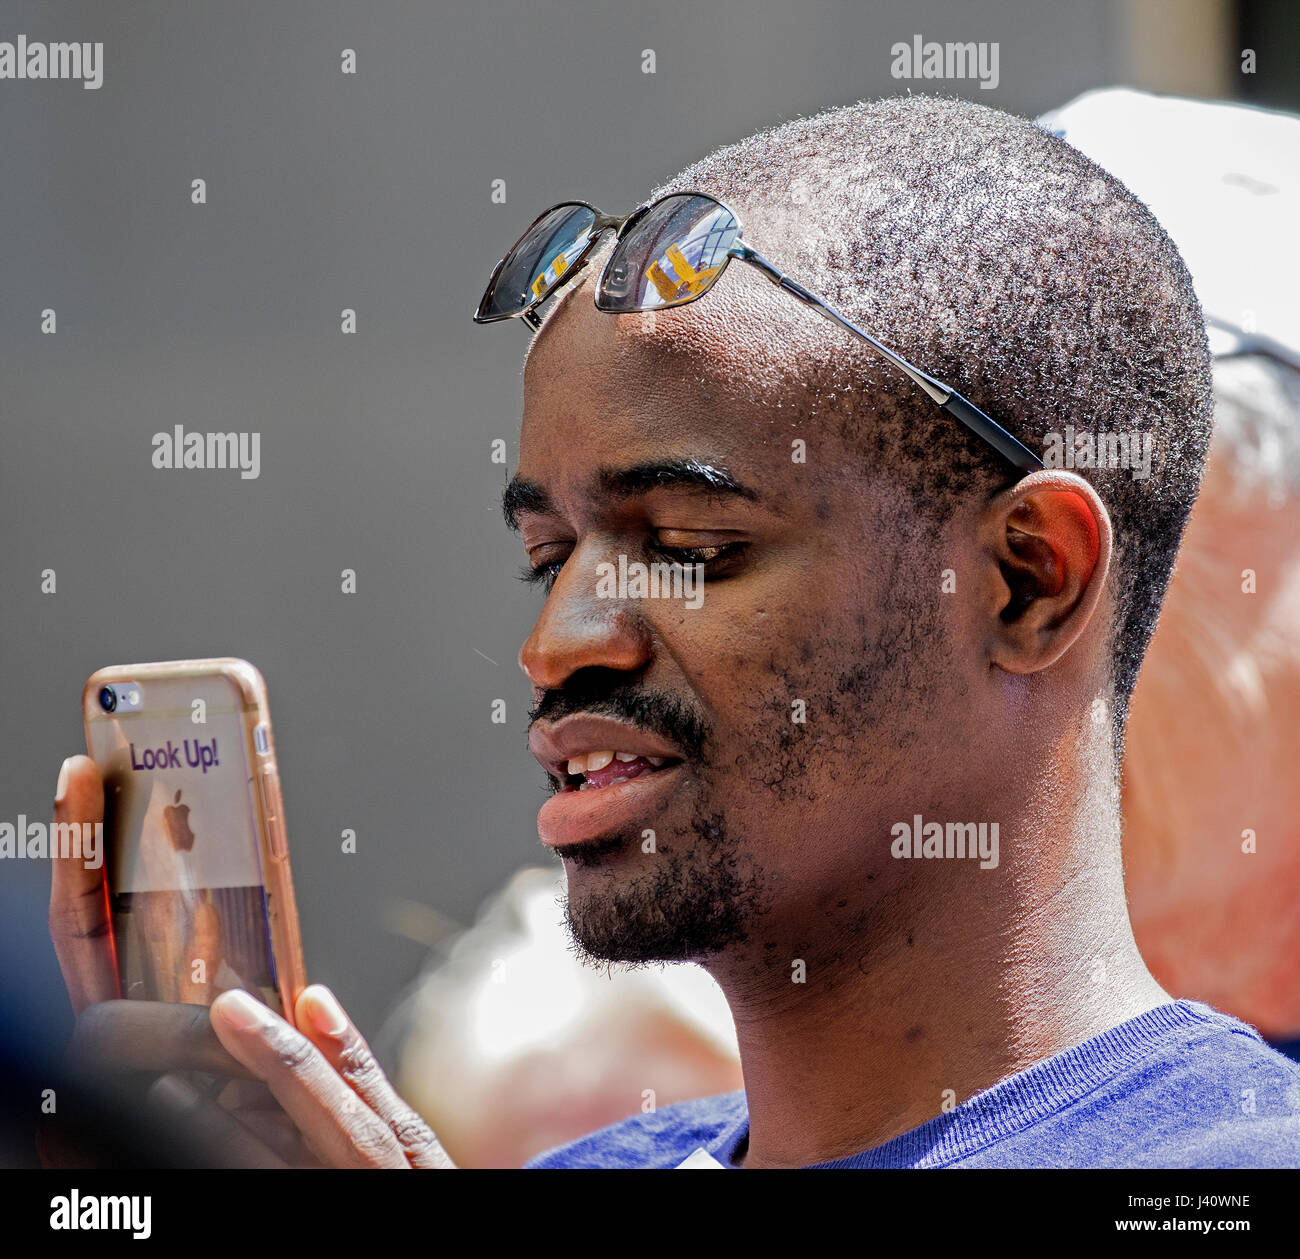 afro american man looking at mobile phone Stock Photo